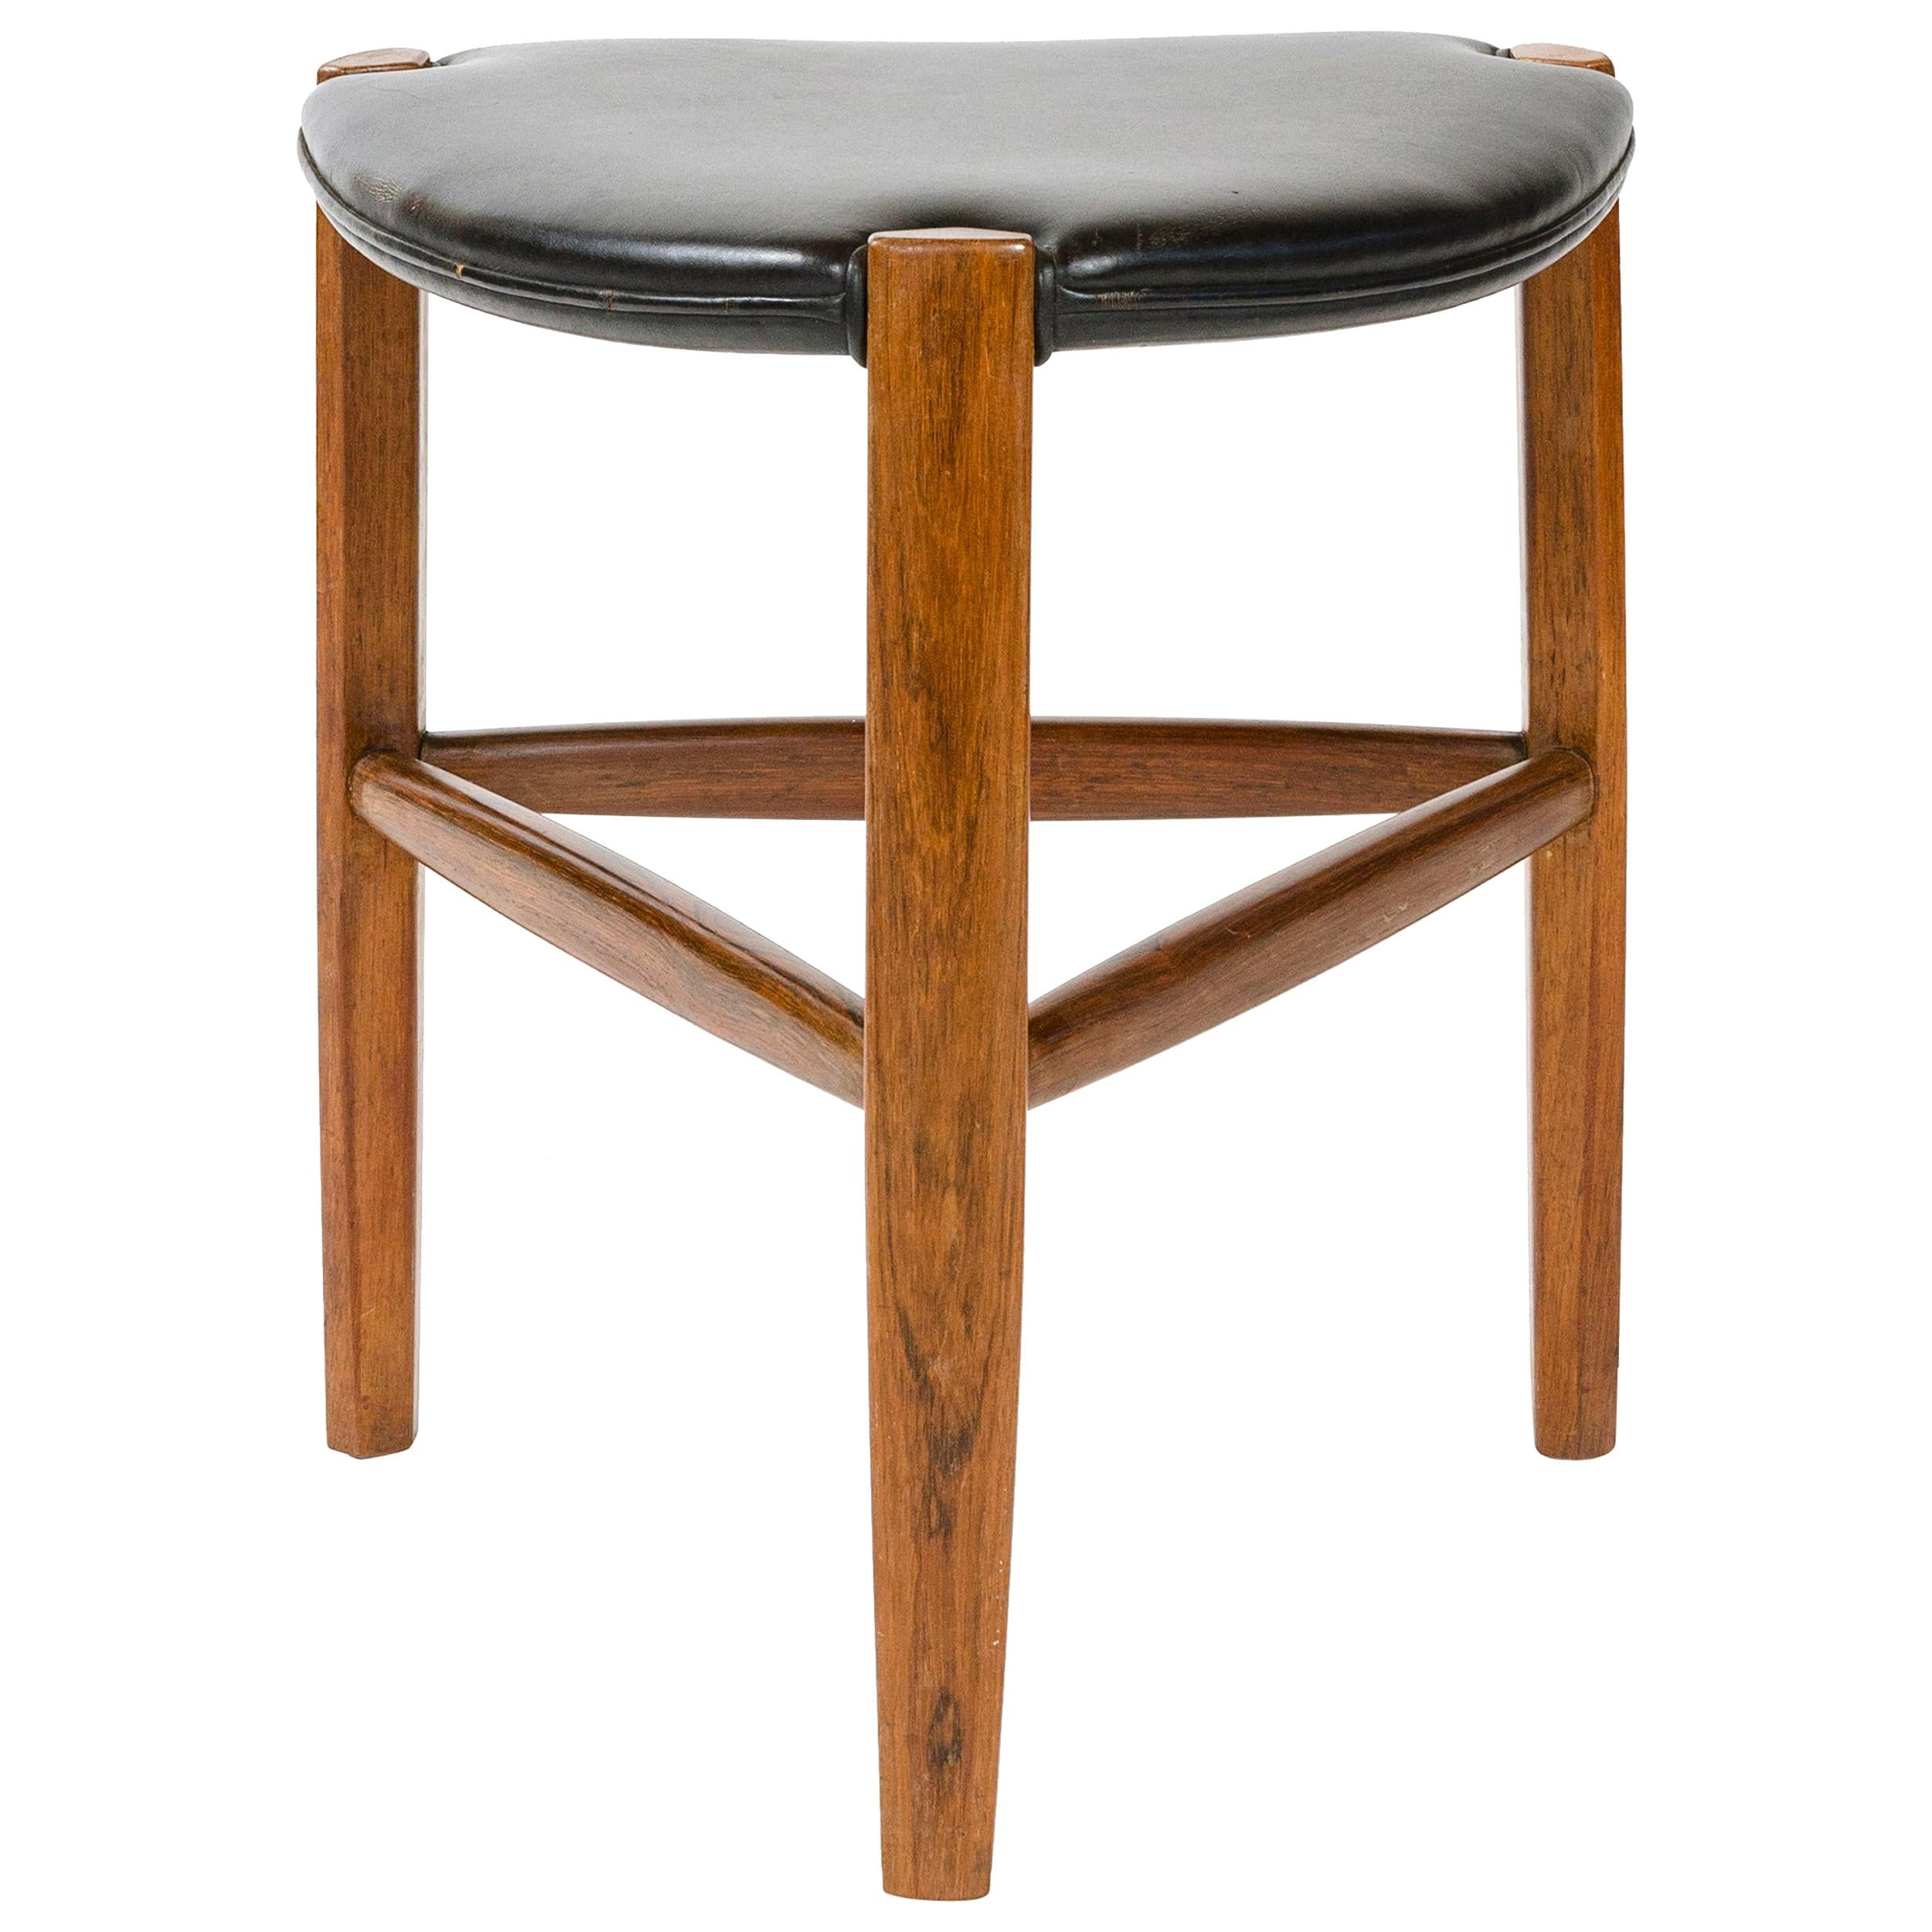 1960s Danish Rosewood Stool by Ole Wanscher for A.J. Iversen